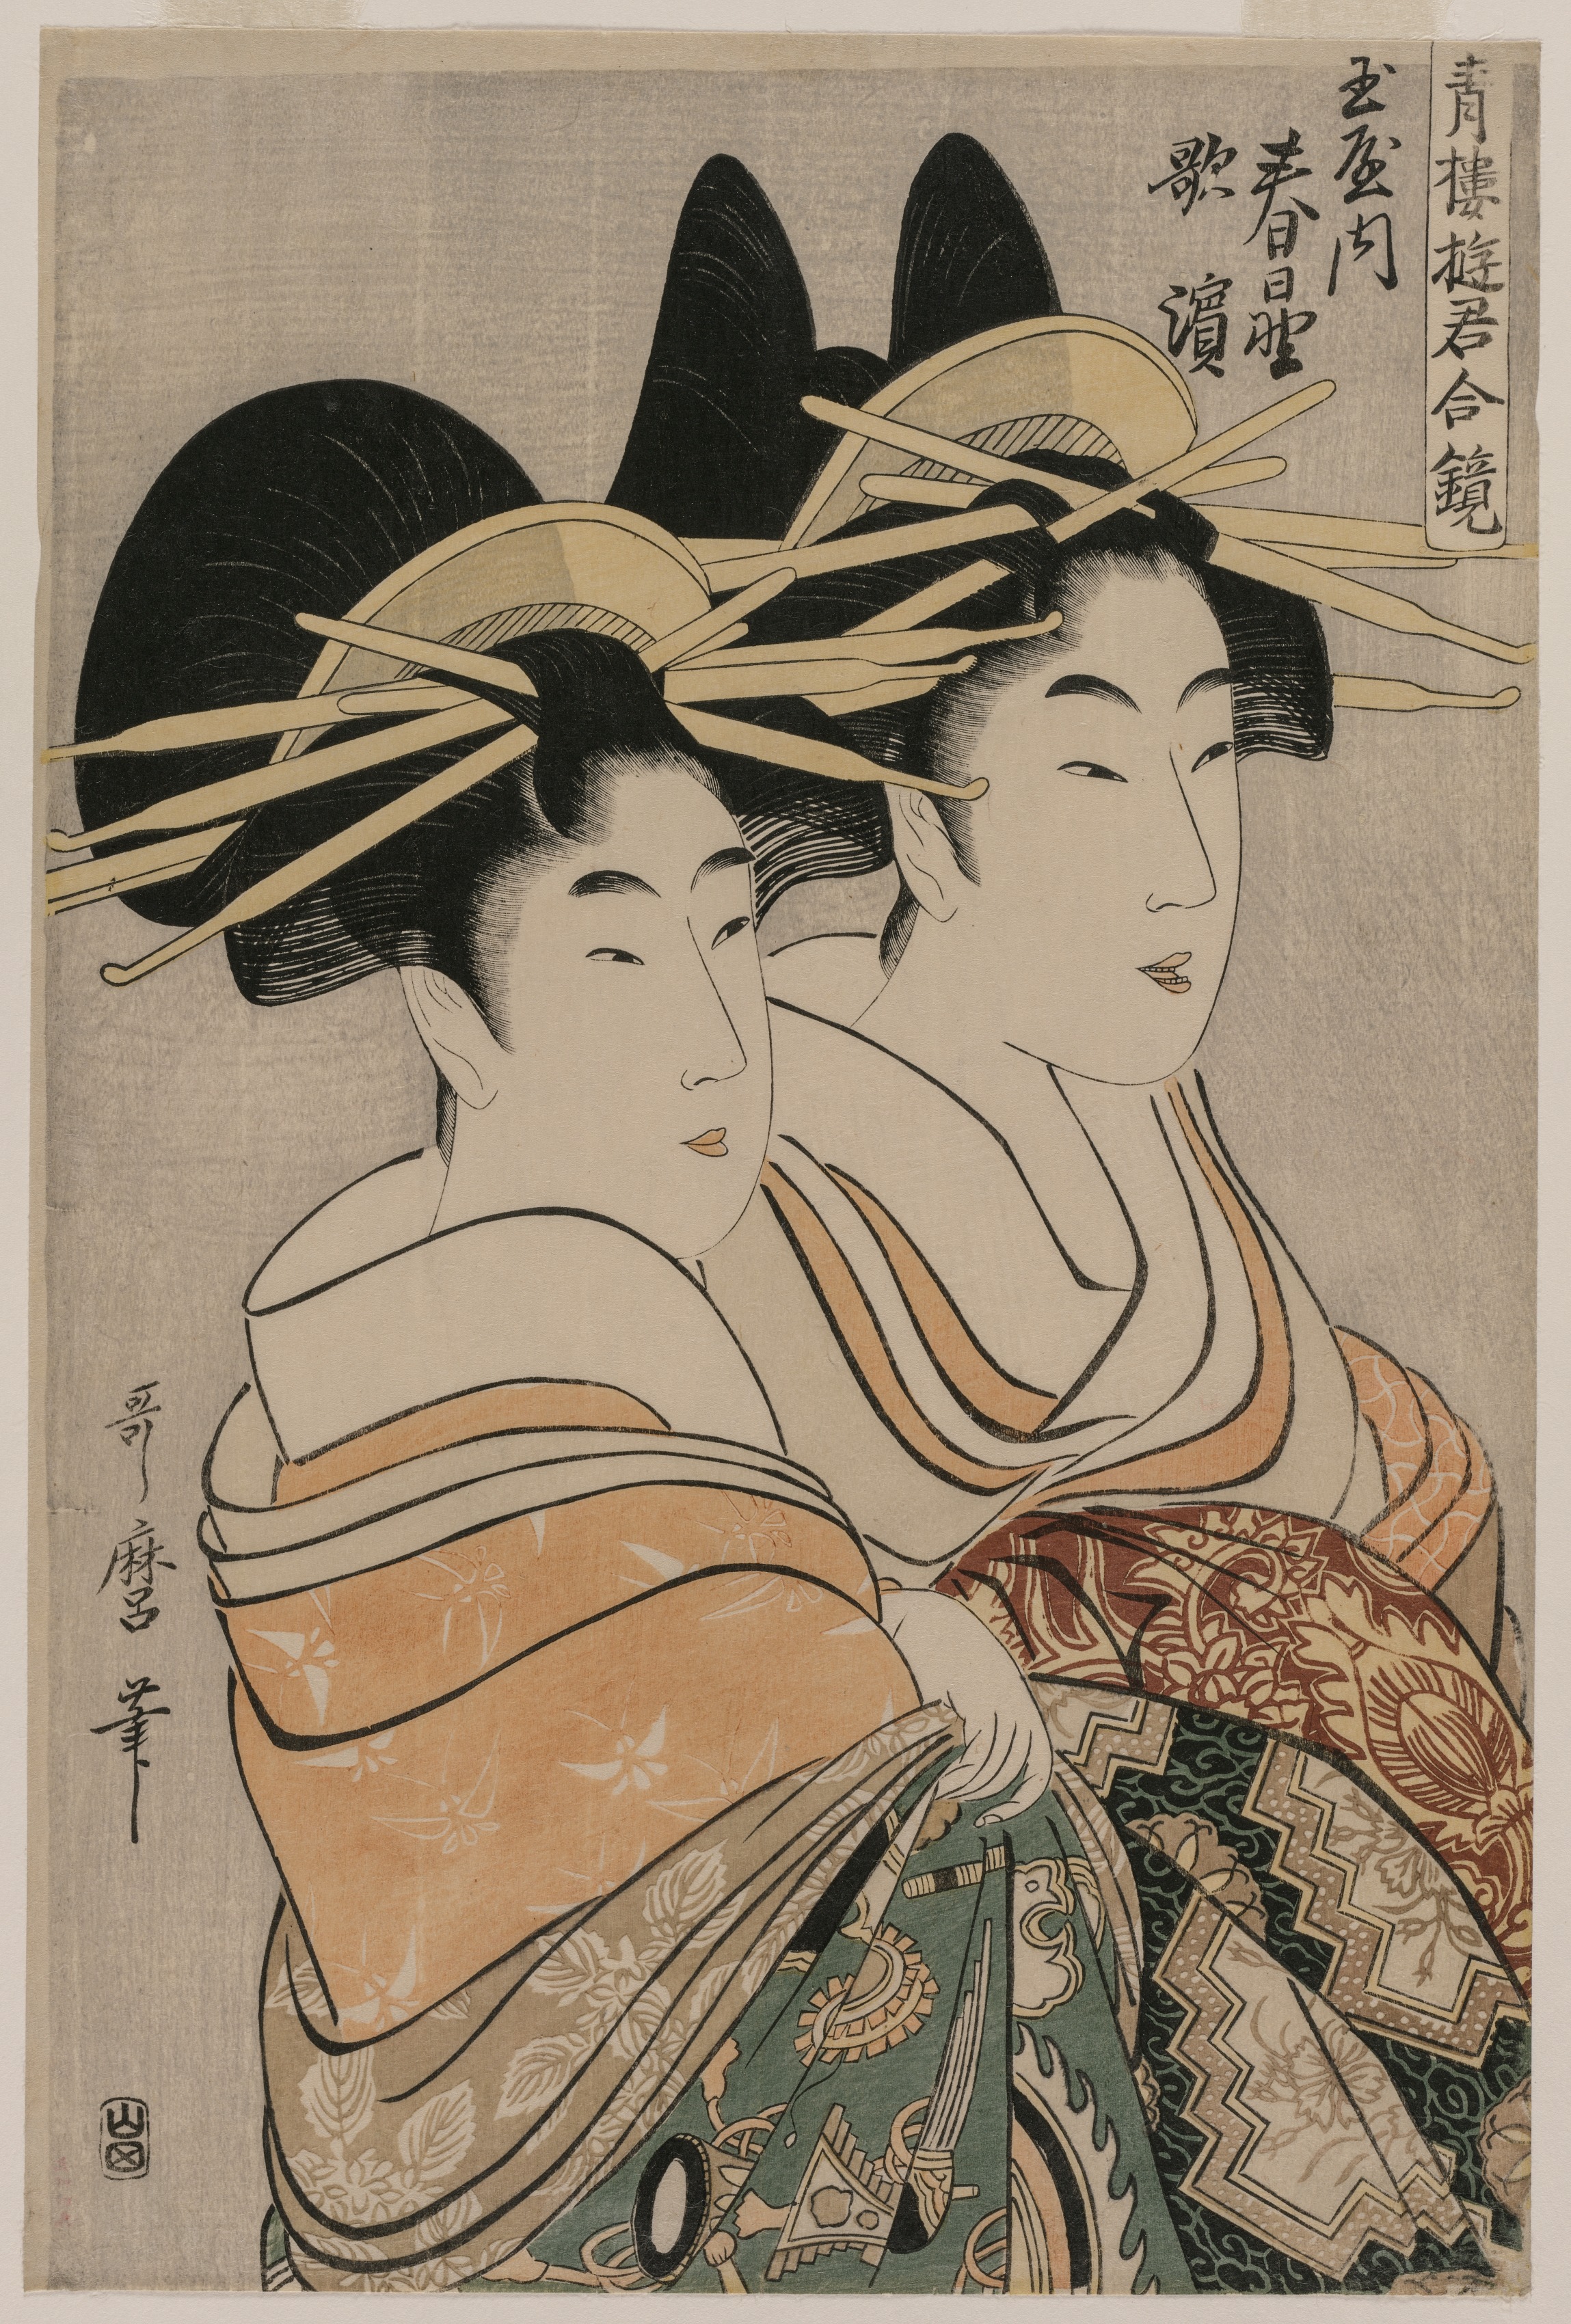 The Courtesans Kasugano and Utahama of Tamaya from the series Courtesans of the Pleasure Quarters in Double Mirrors